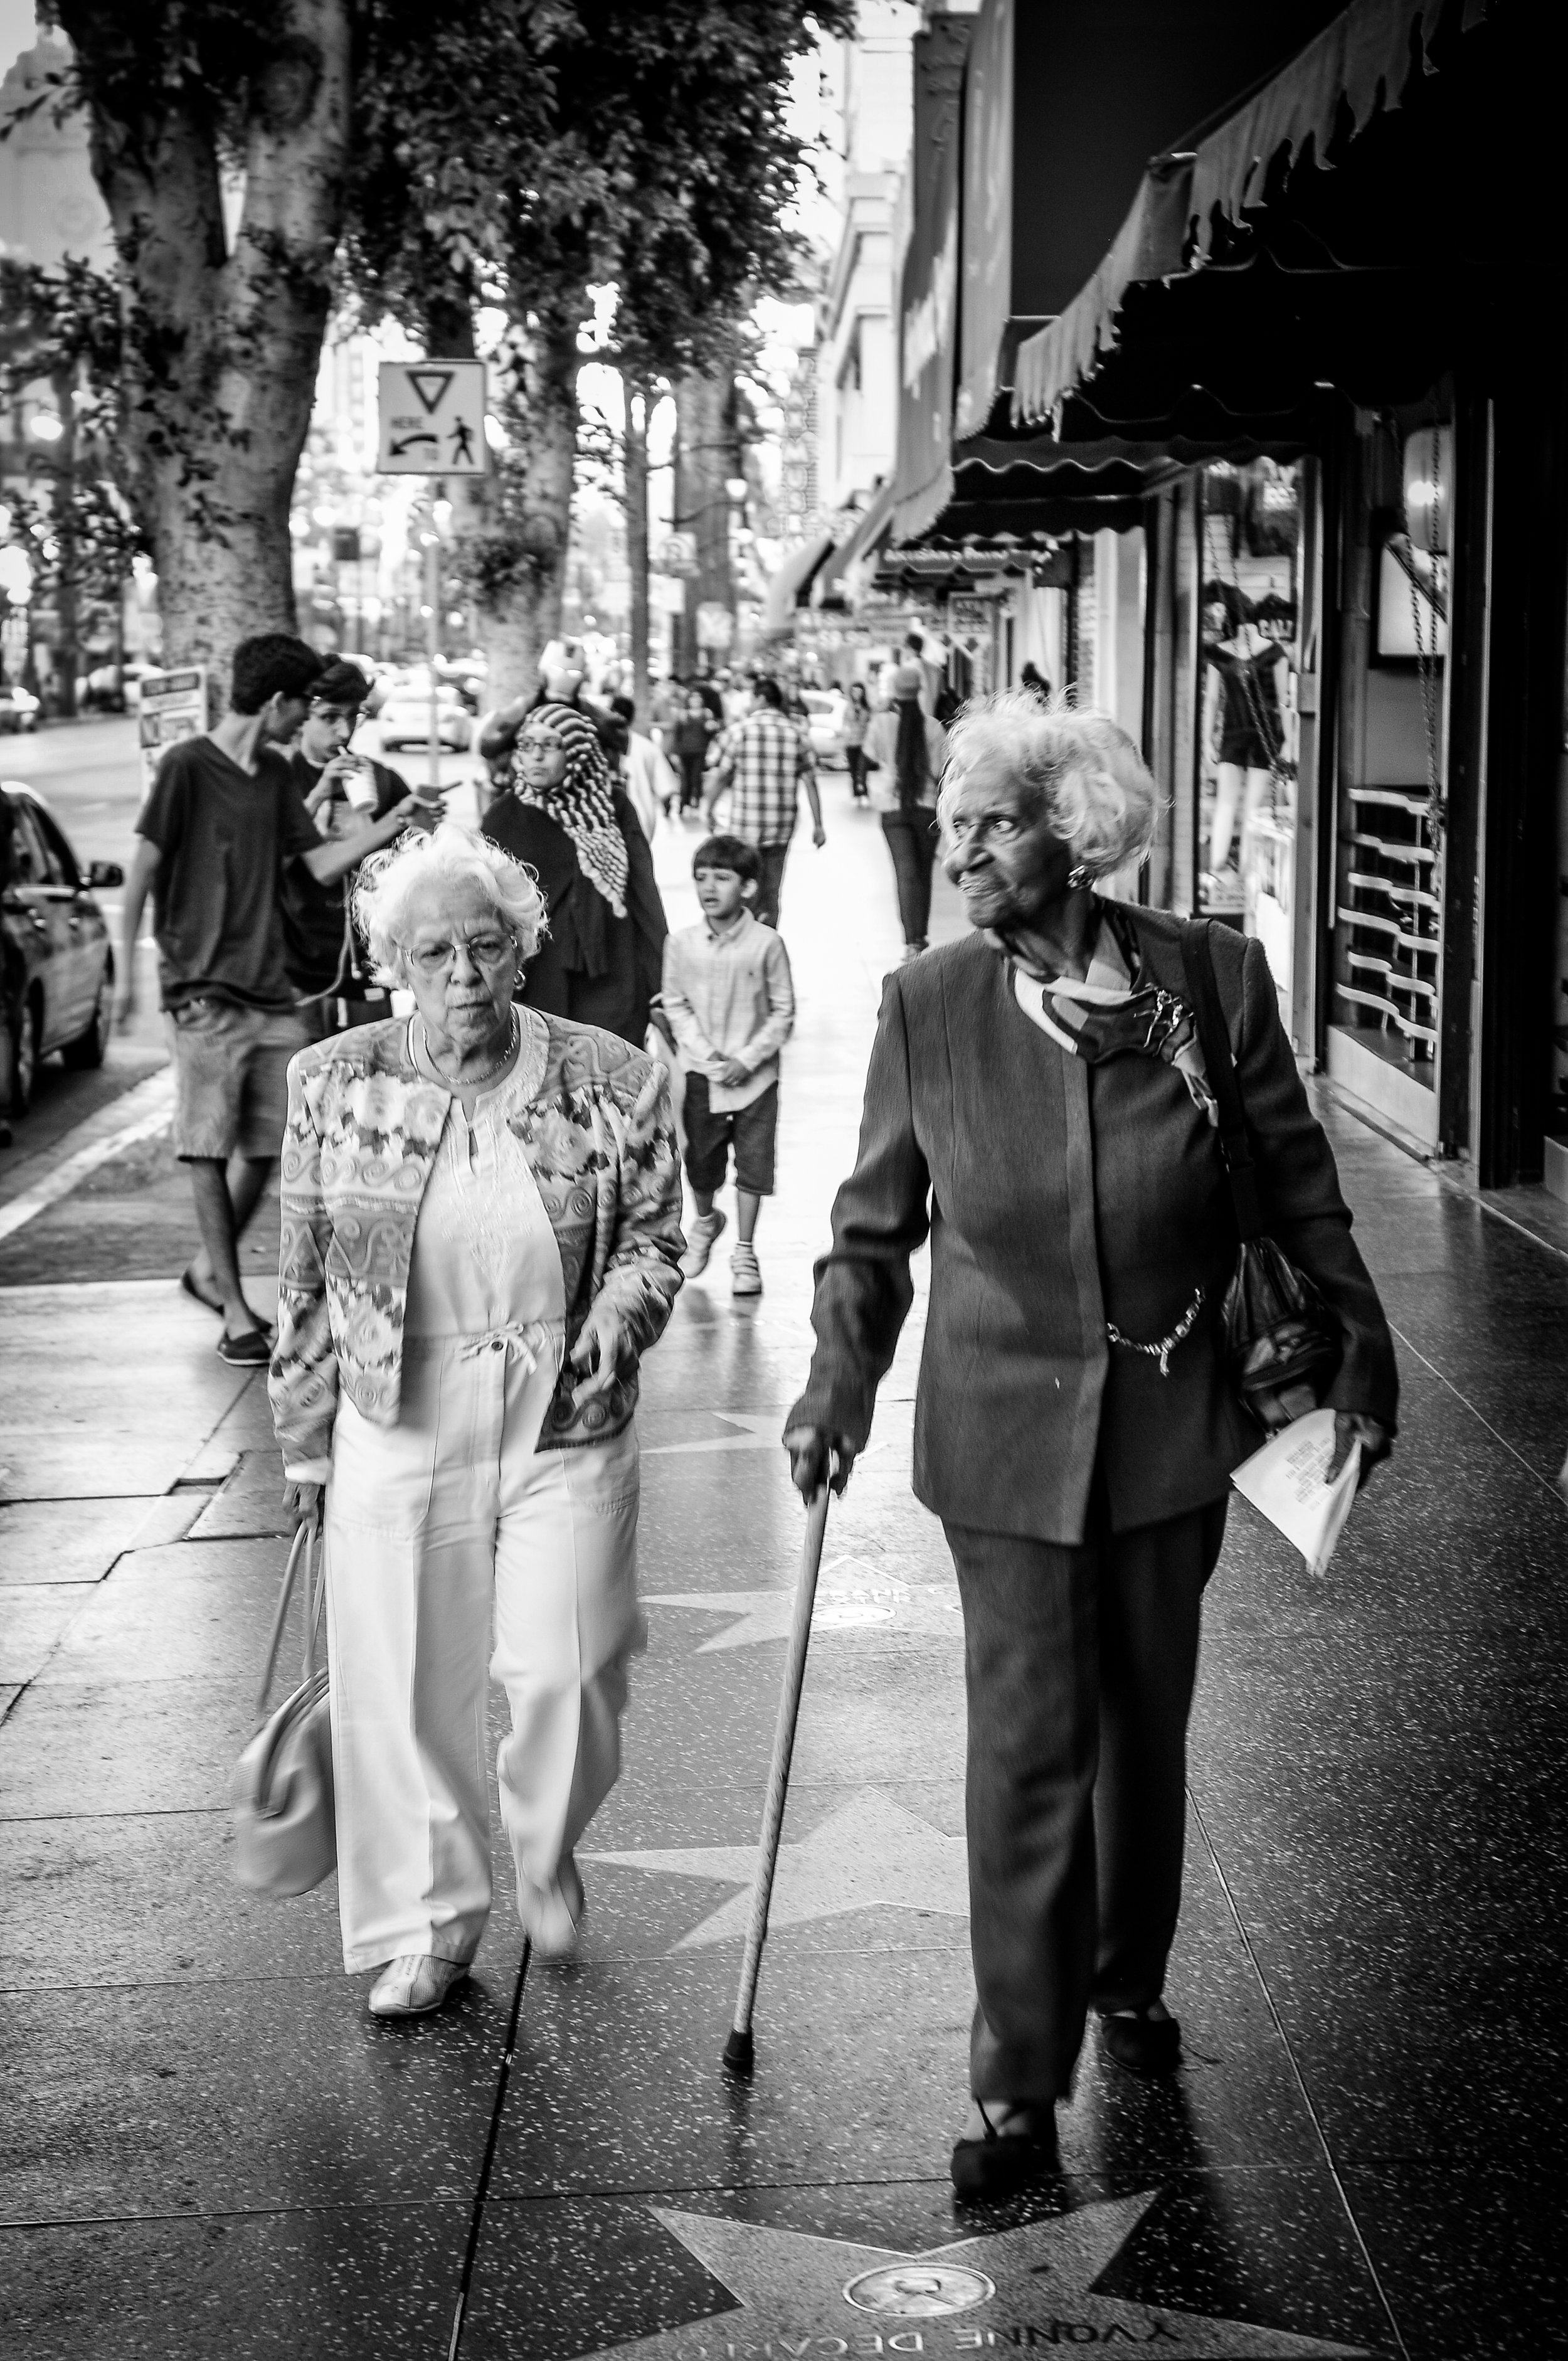 Two Hollywood Dames on an afternoon stroll,  Saturday September 15,2012